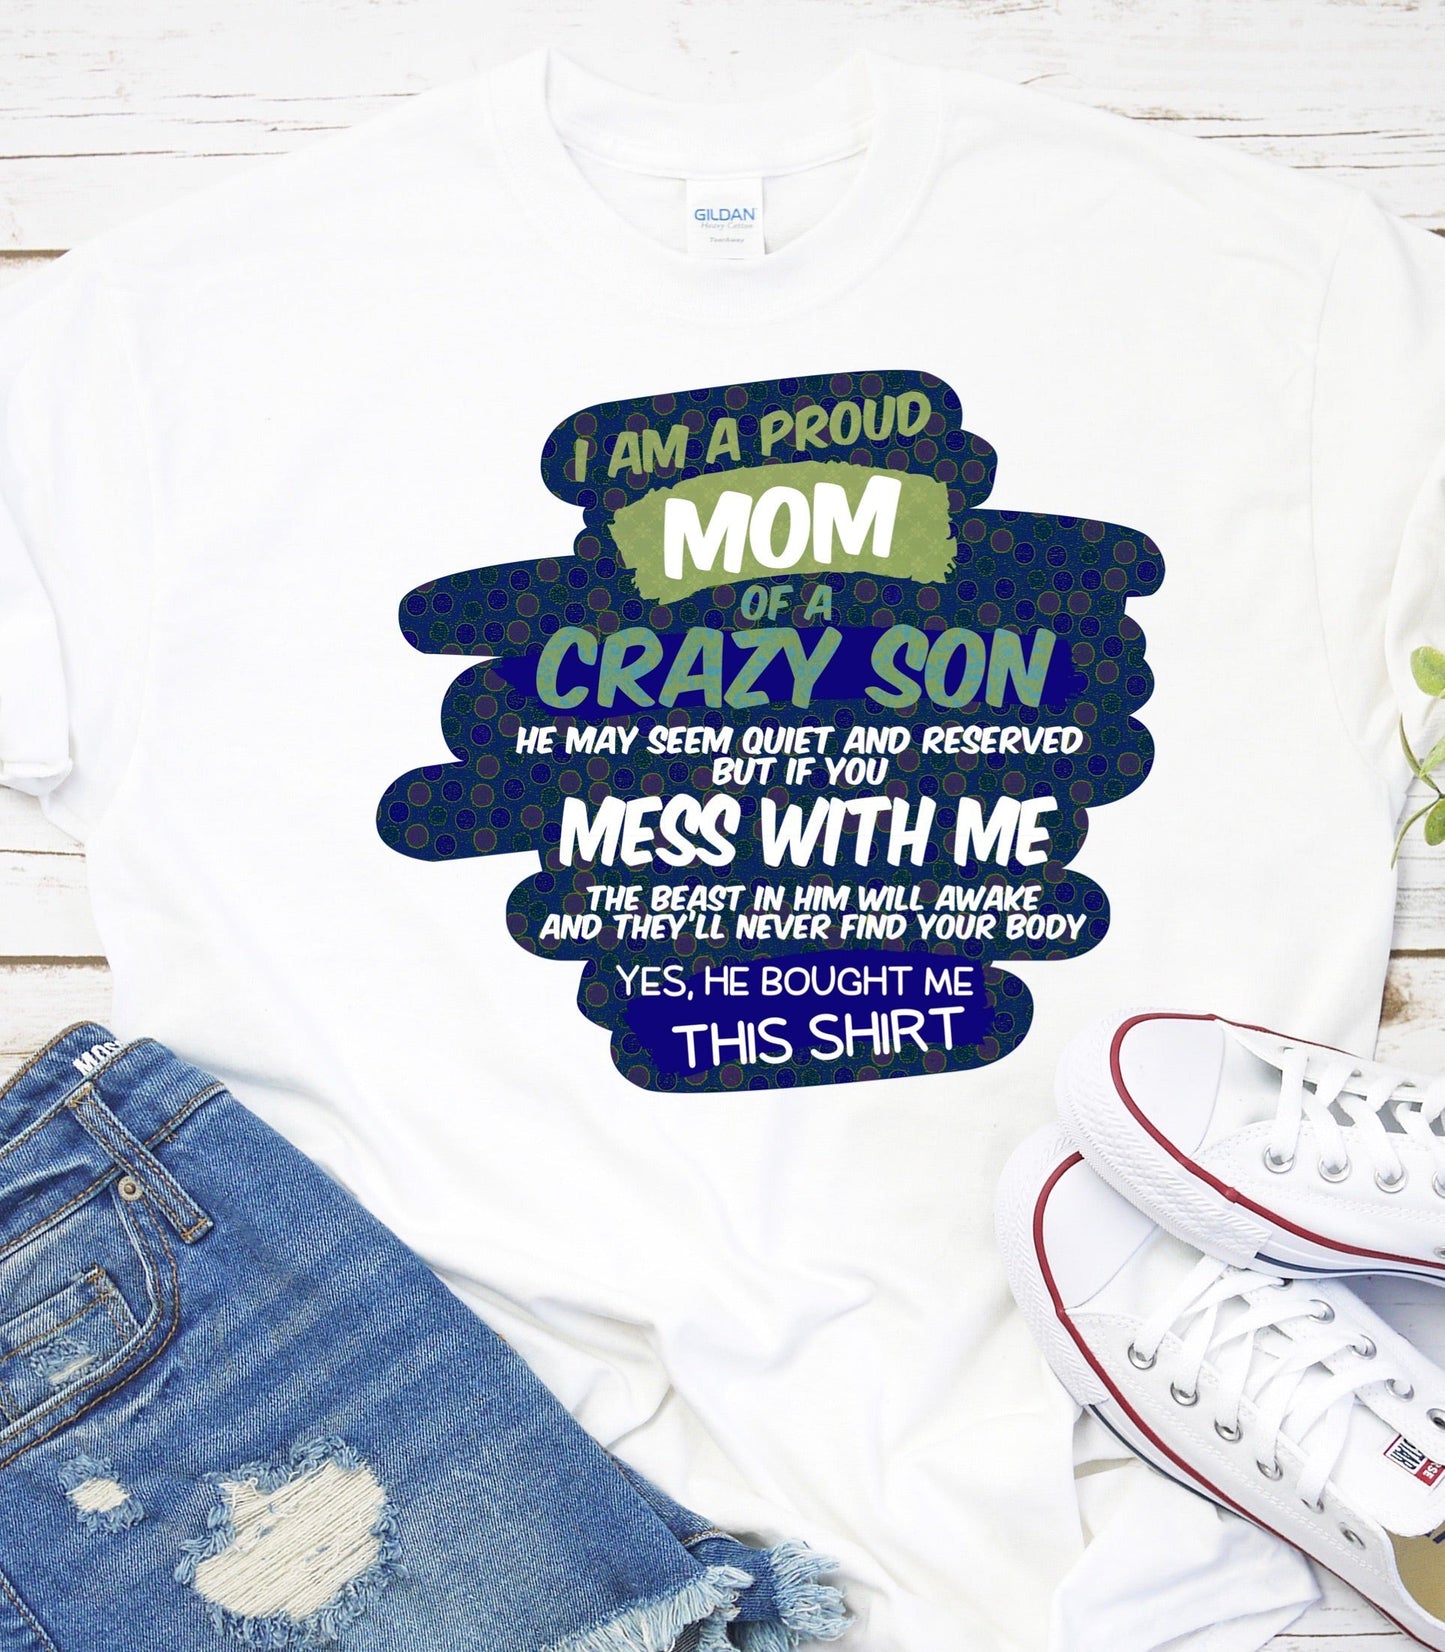 I am a crazy mom of a son he may seem quiet and reserved but if you mess with me DTF TRANSFERPRINT TO ORDER